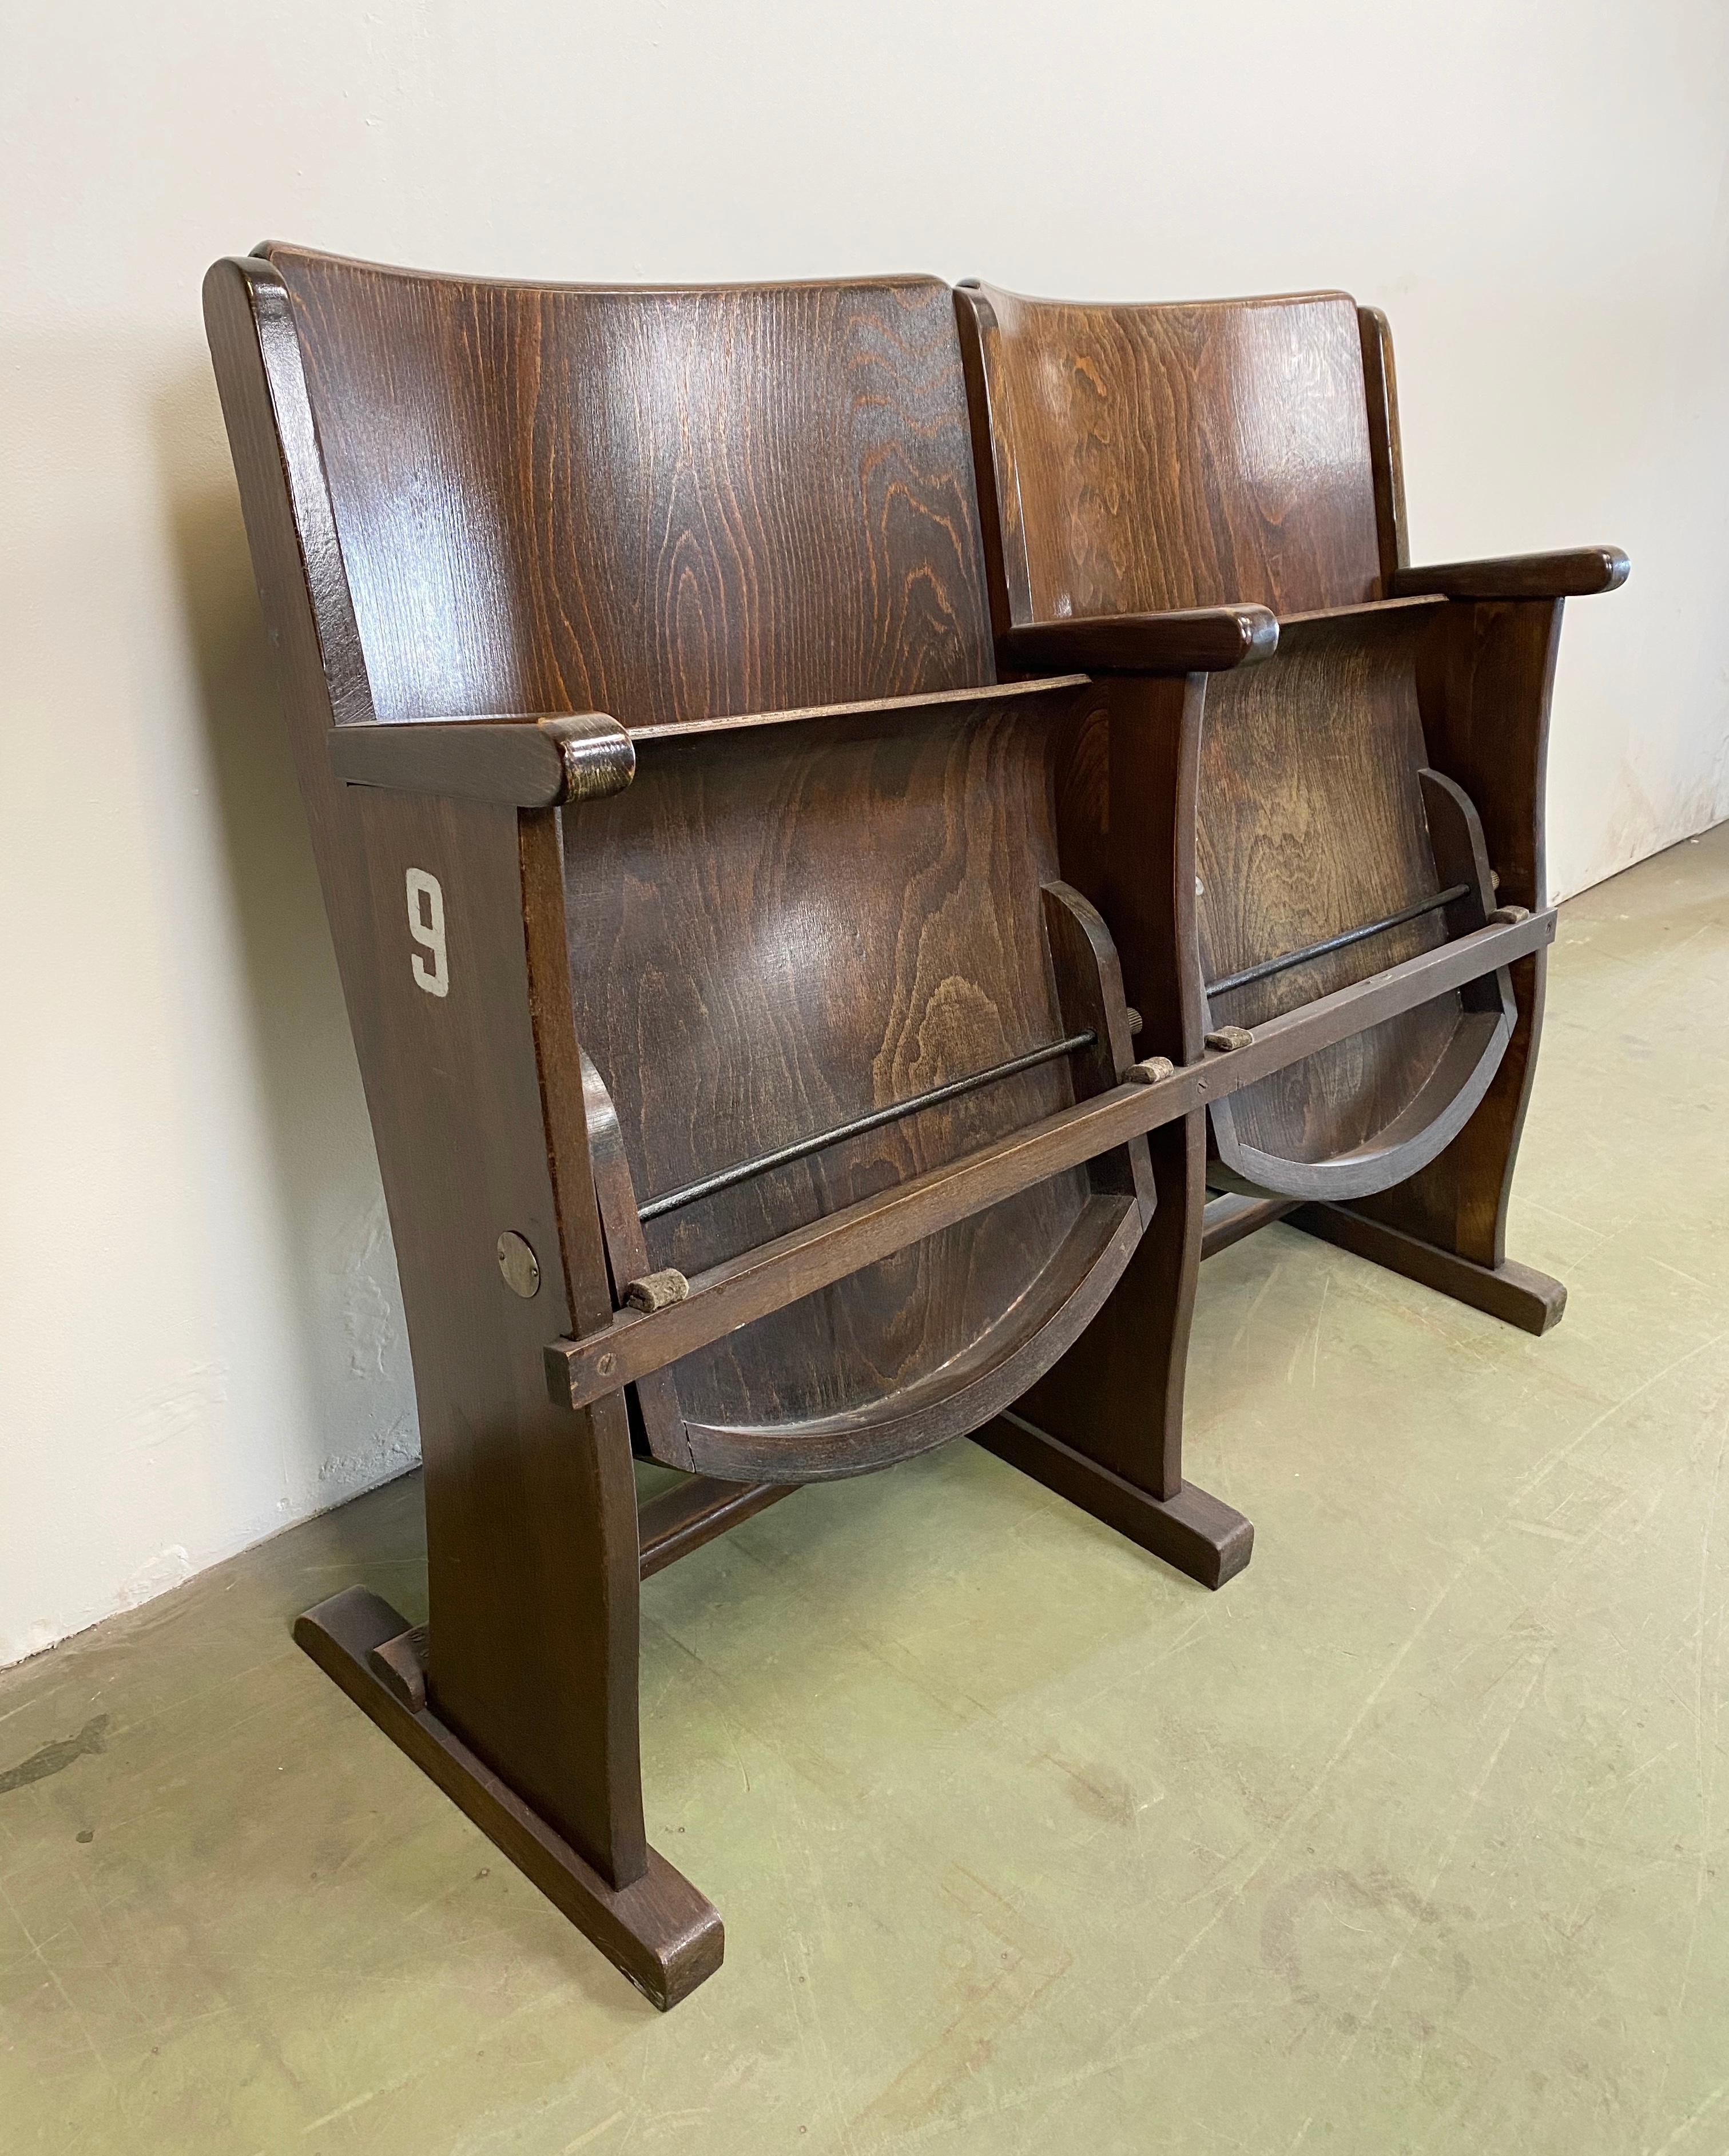 Czech Vintage Two-Seat Cinema Bench from Ton, 1950s